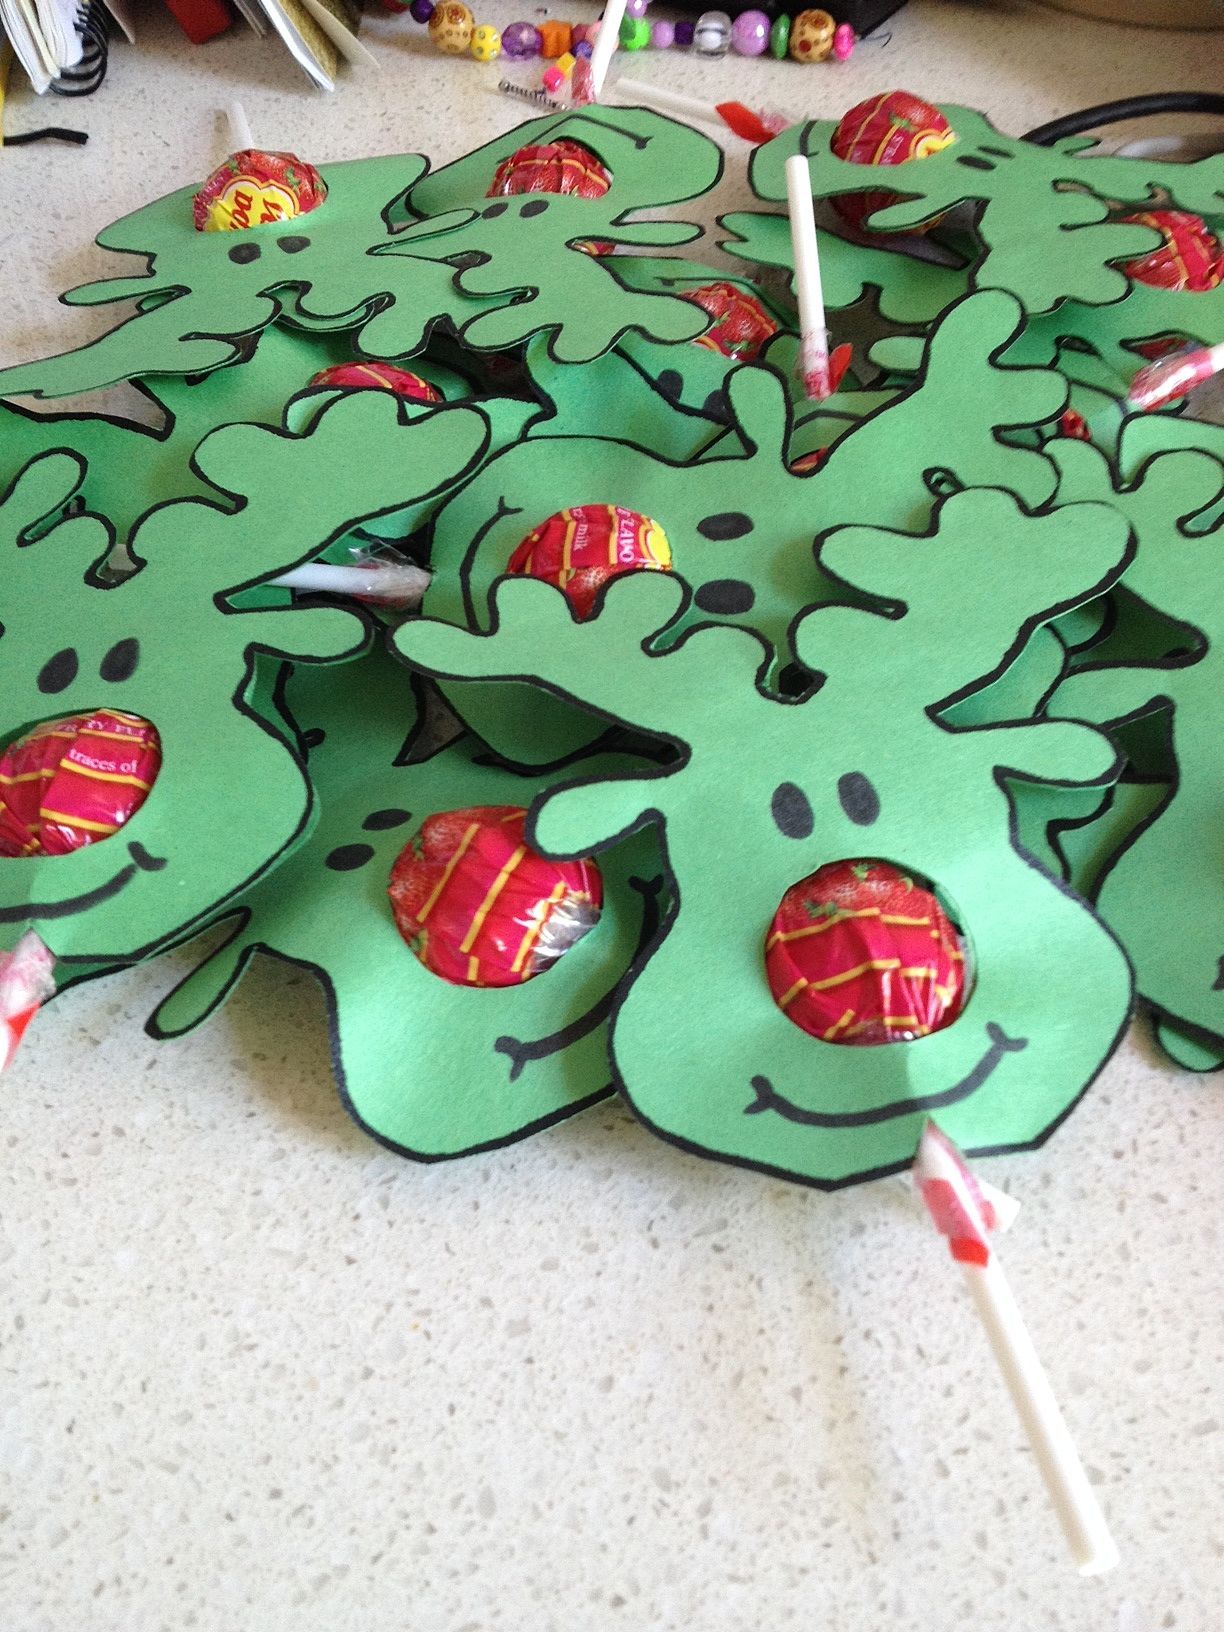 Reindeer face lollipops – link to the printable in the comments of the blog post